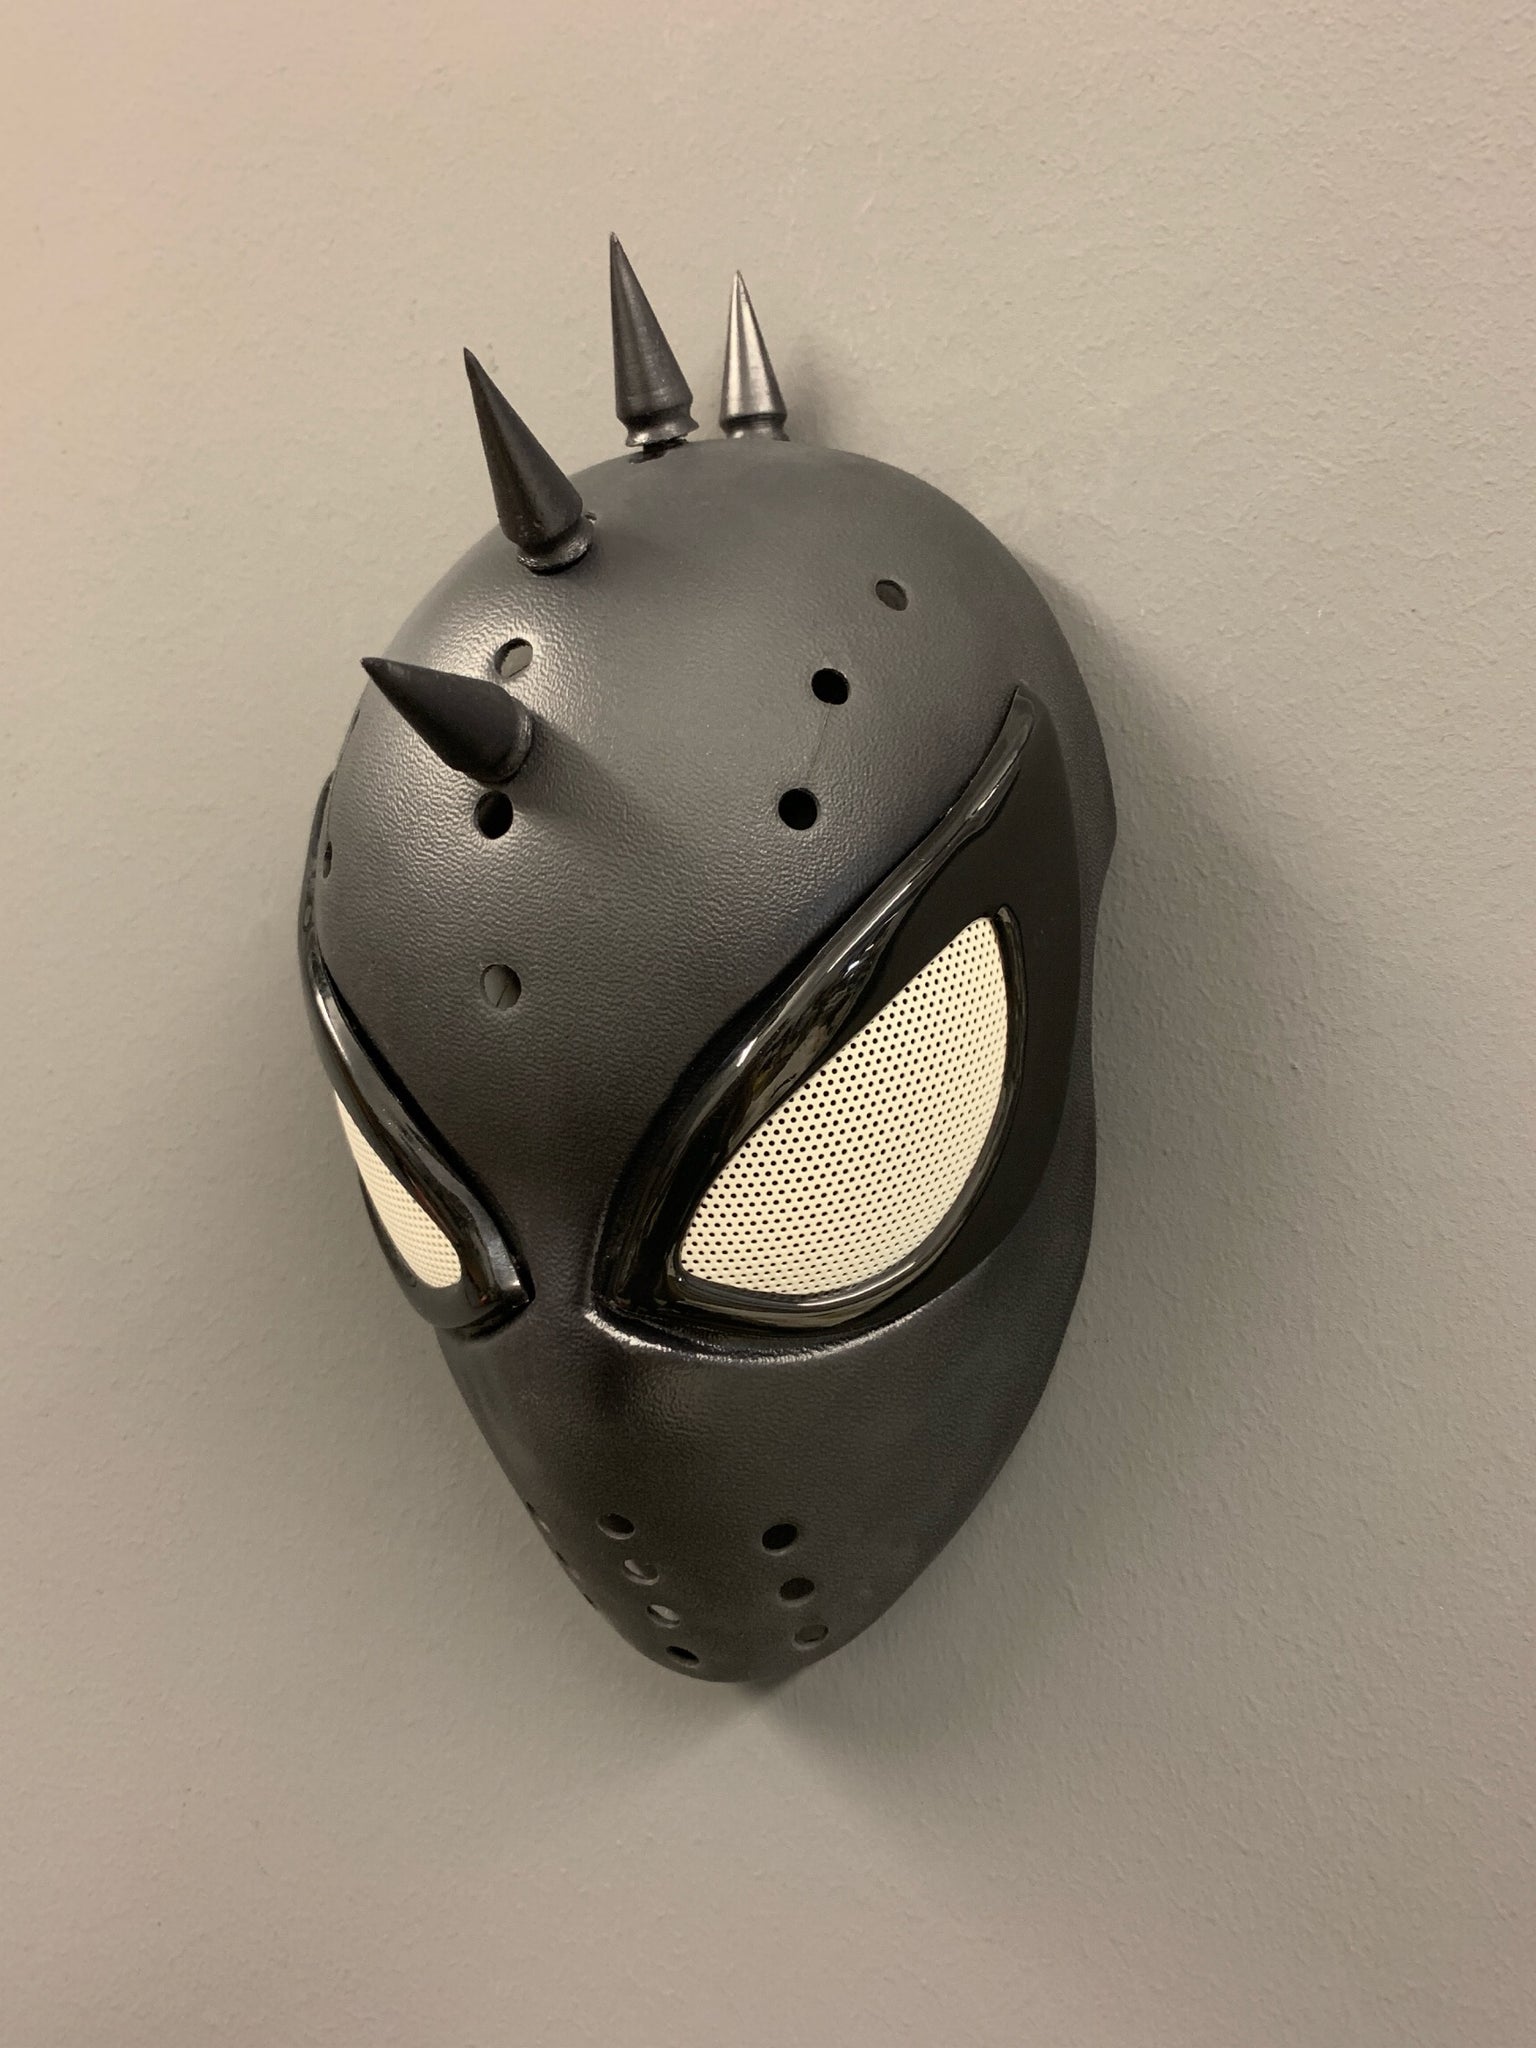 3D Printed ‘Spider-Punk’ PS4 Spikes ONLY.